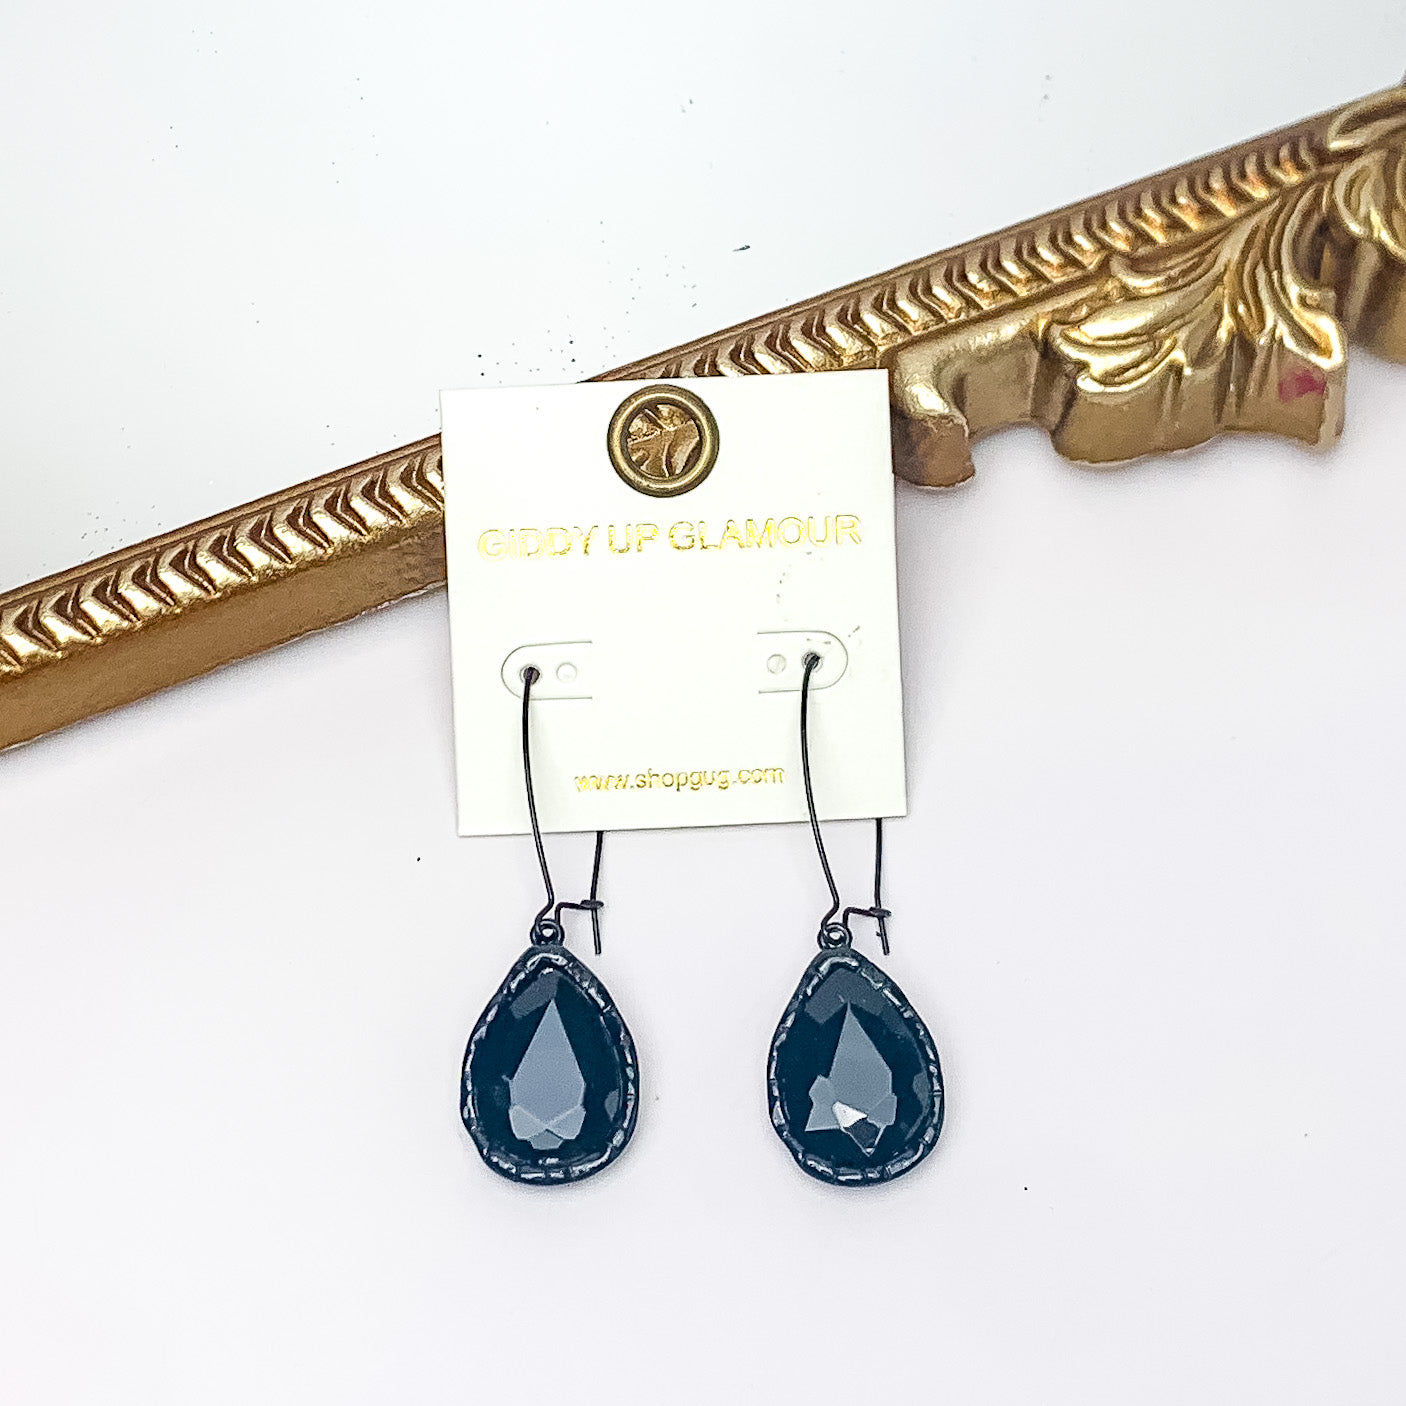 Radiant Kidney Wire Teardrop Earrings With Crystals in Black. Pictured on a white background with a gold frame in the background.